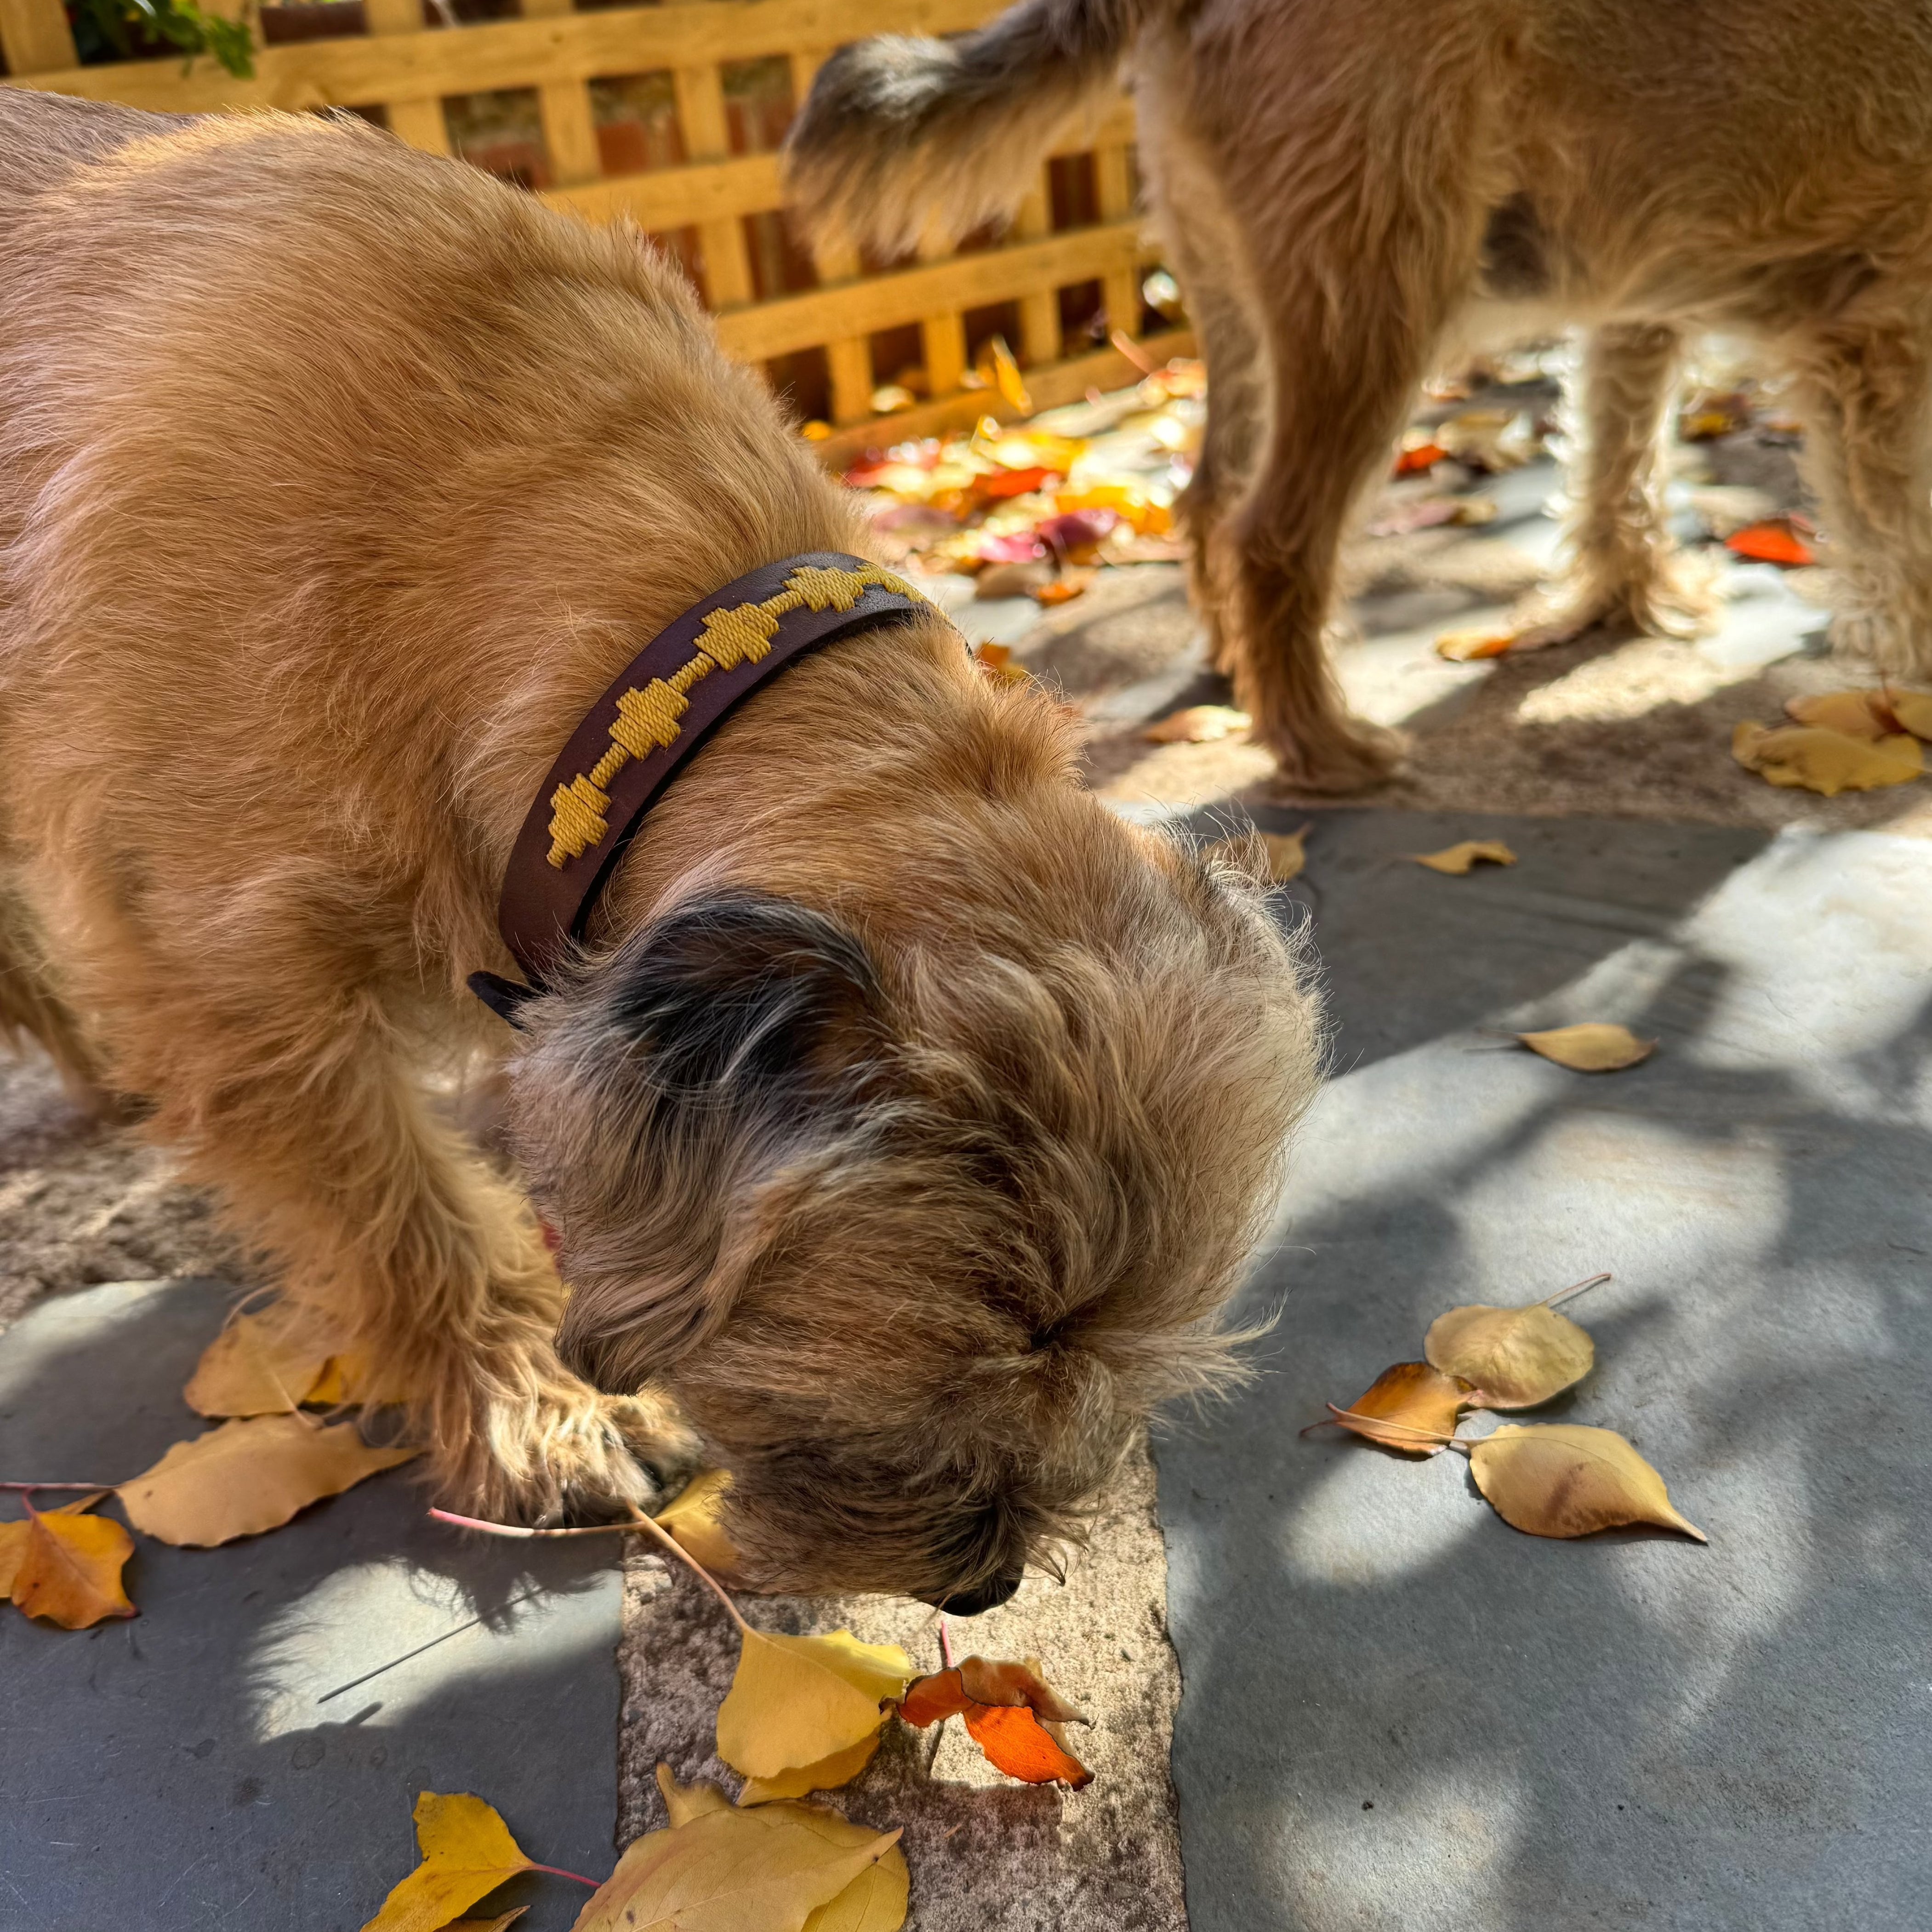 Two brown hounds are sniffing the ground covered with scattered yellow and orange leaves. A wooden lattice fence can be seen in the background, with sunlight casting dappled shadows on the stone-paved floor. Both hounds have shaggy fur and one has a Polo Bark Collar - wheat by Georgie Paws adorned with a yellow leaf pattern.